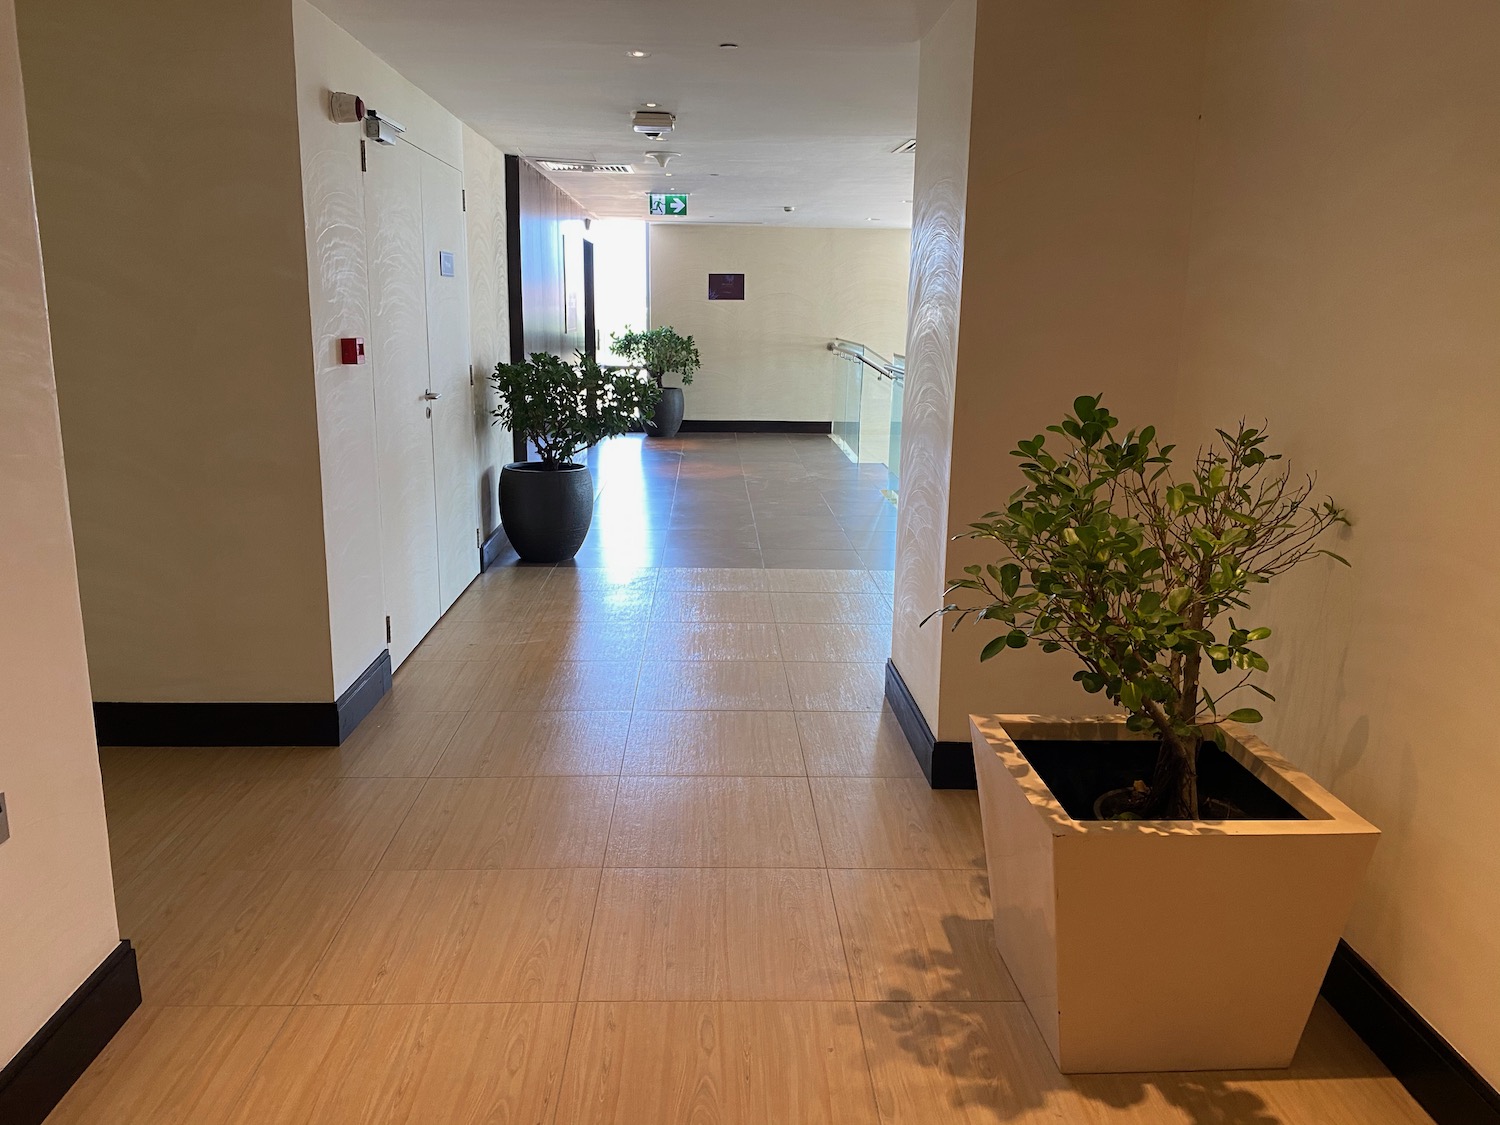 a hallway with plants in pots